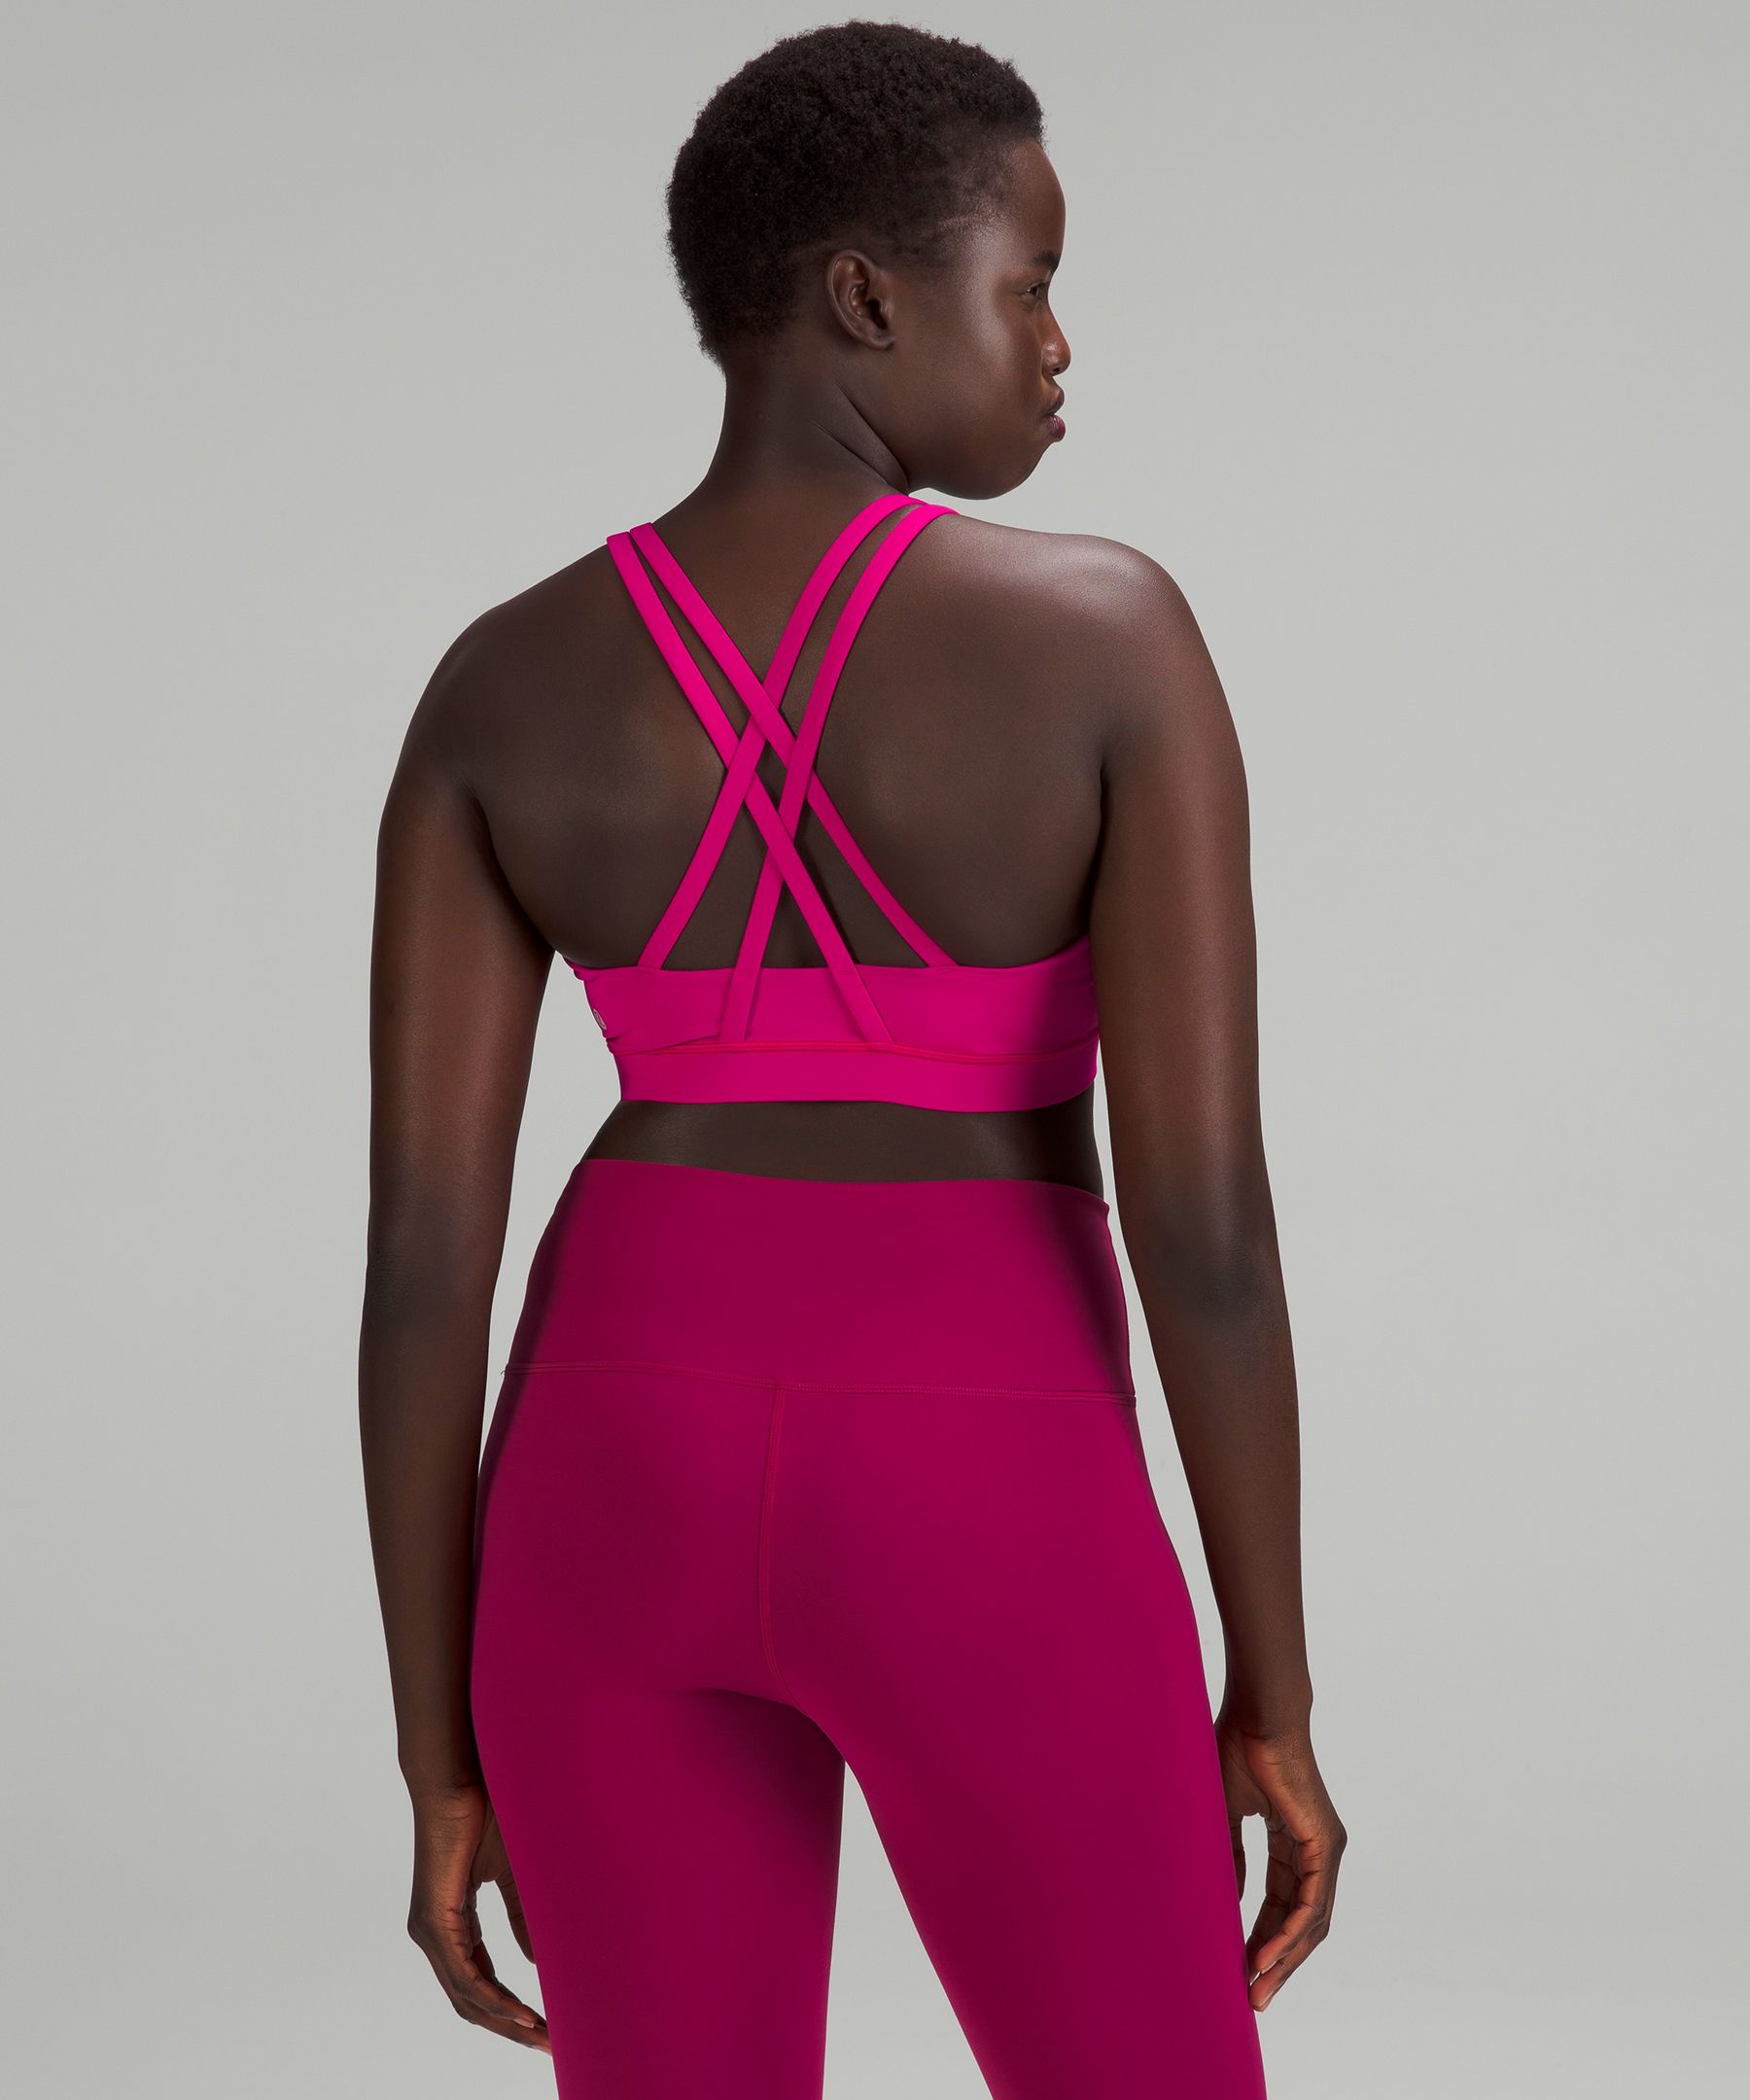 special offers & promotions here NEW Lululemon Energy Shine Sport